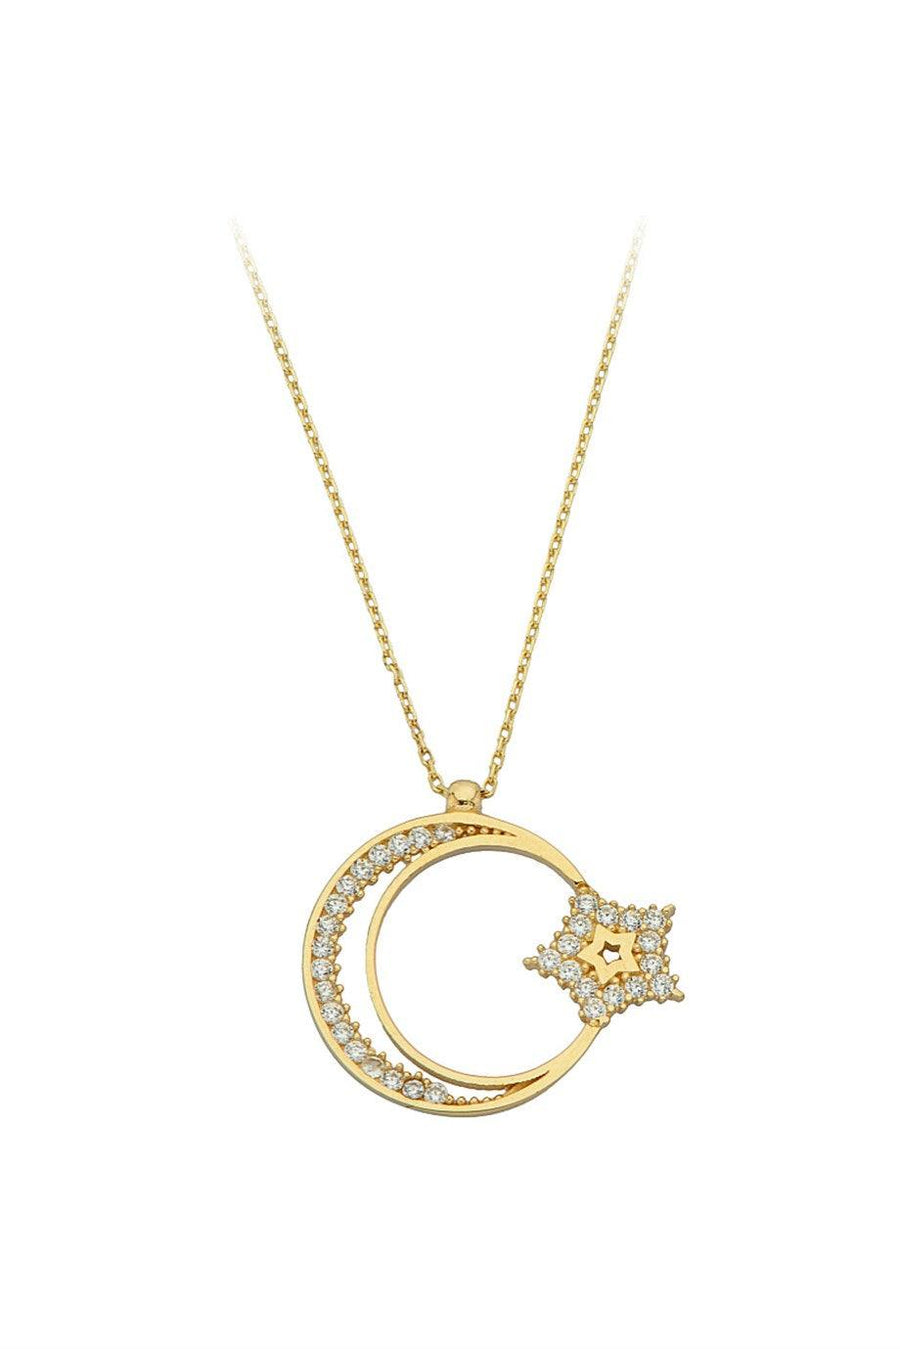 Golden Stone Moon Star Necklace